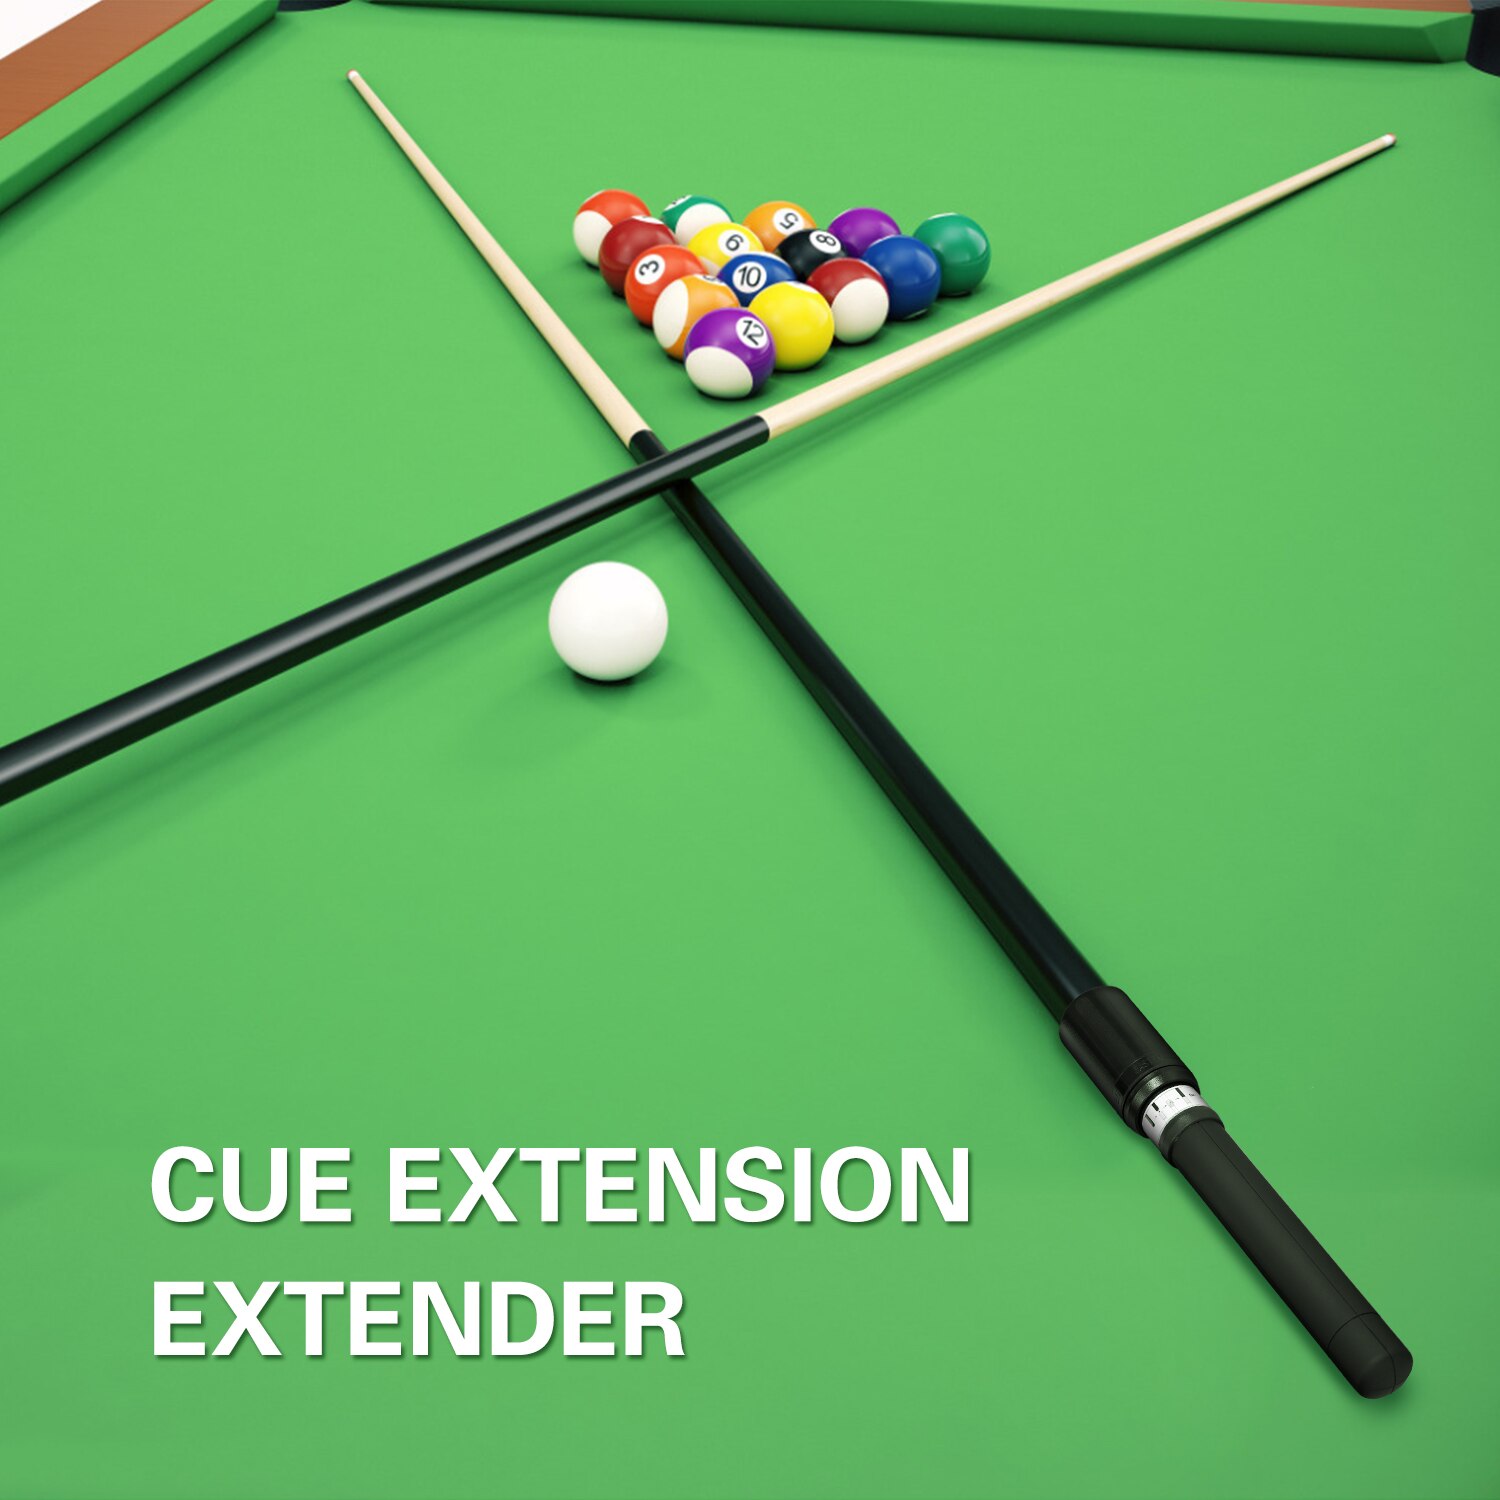 Black White Pool Cue Extension Extender Indoor Entertainment Telescopic Cue Extension for Billiard Pool Cues